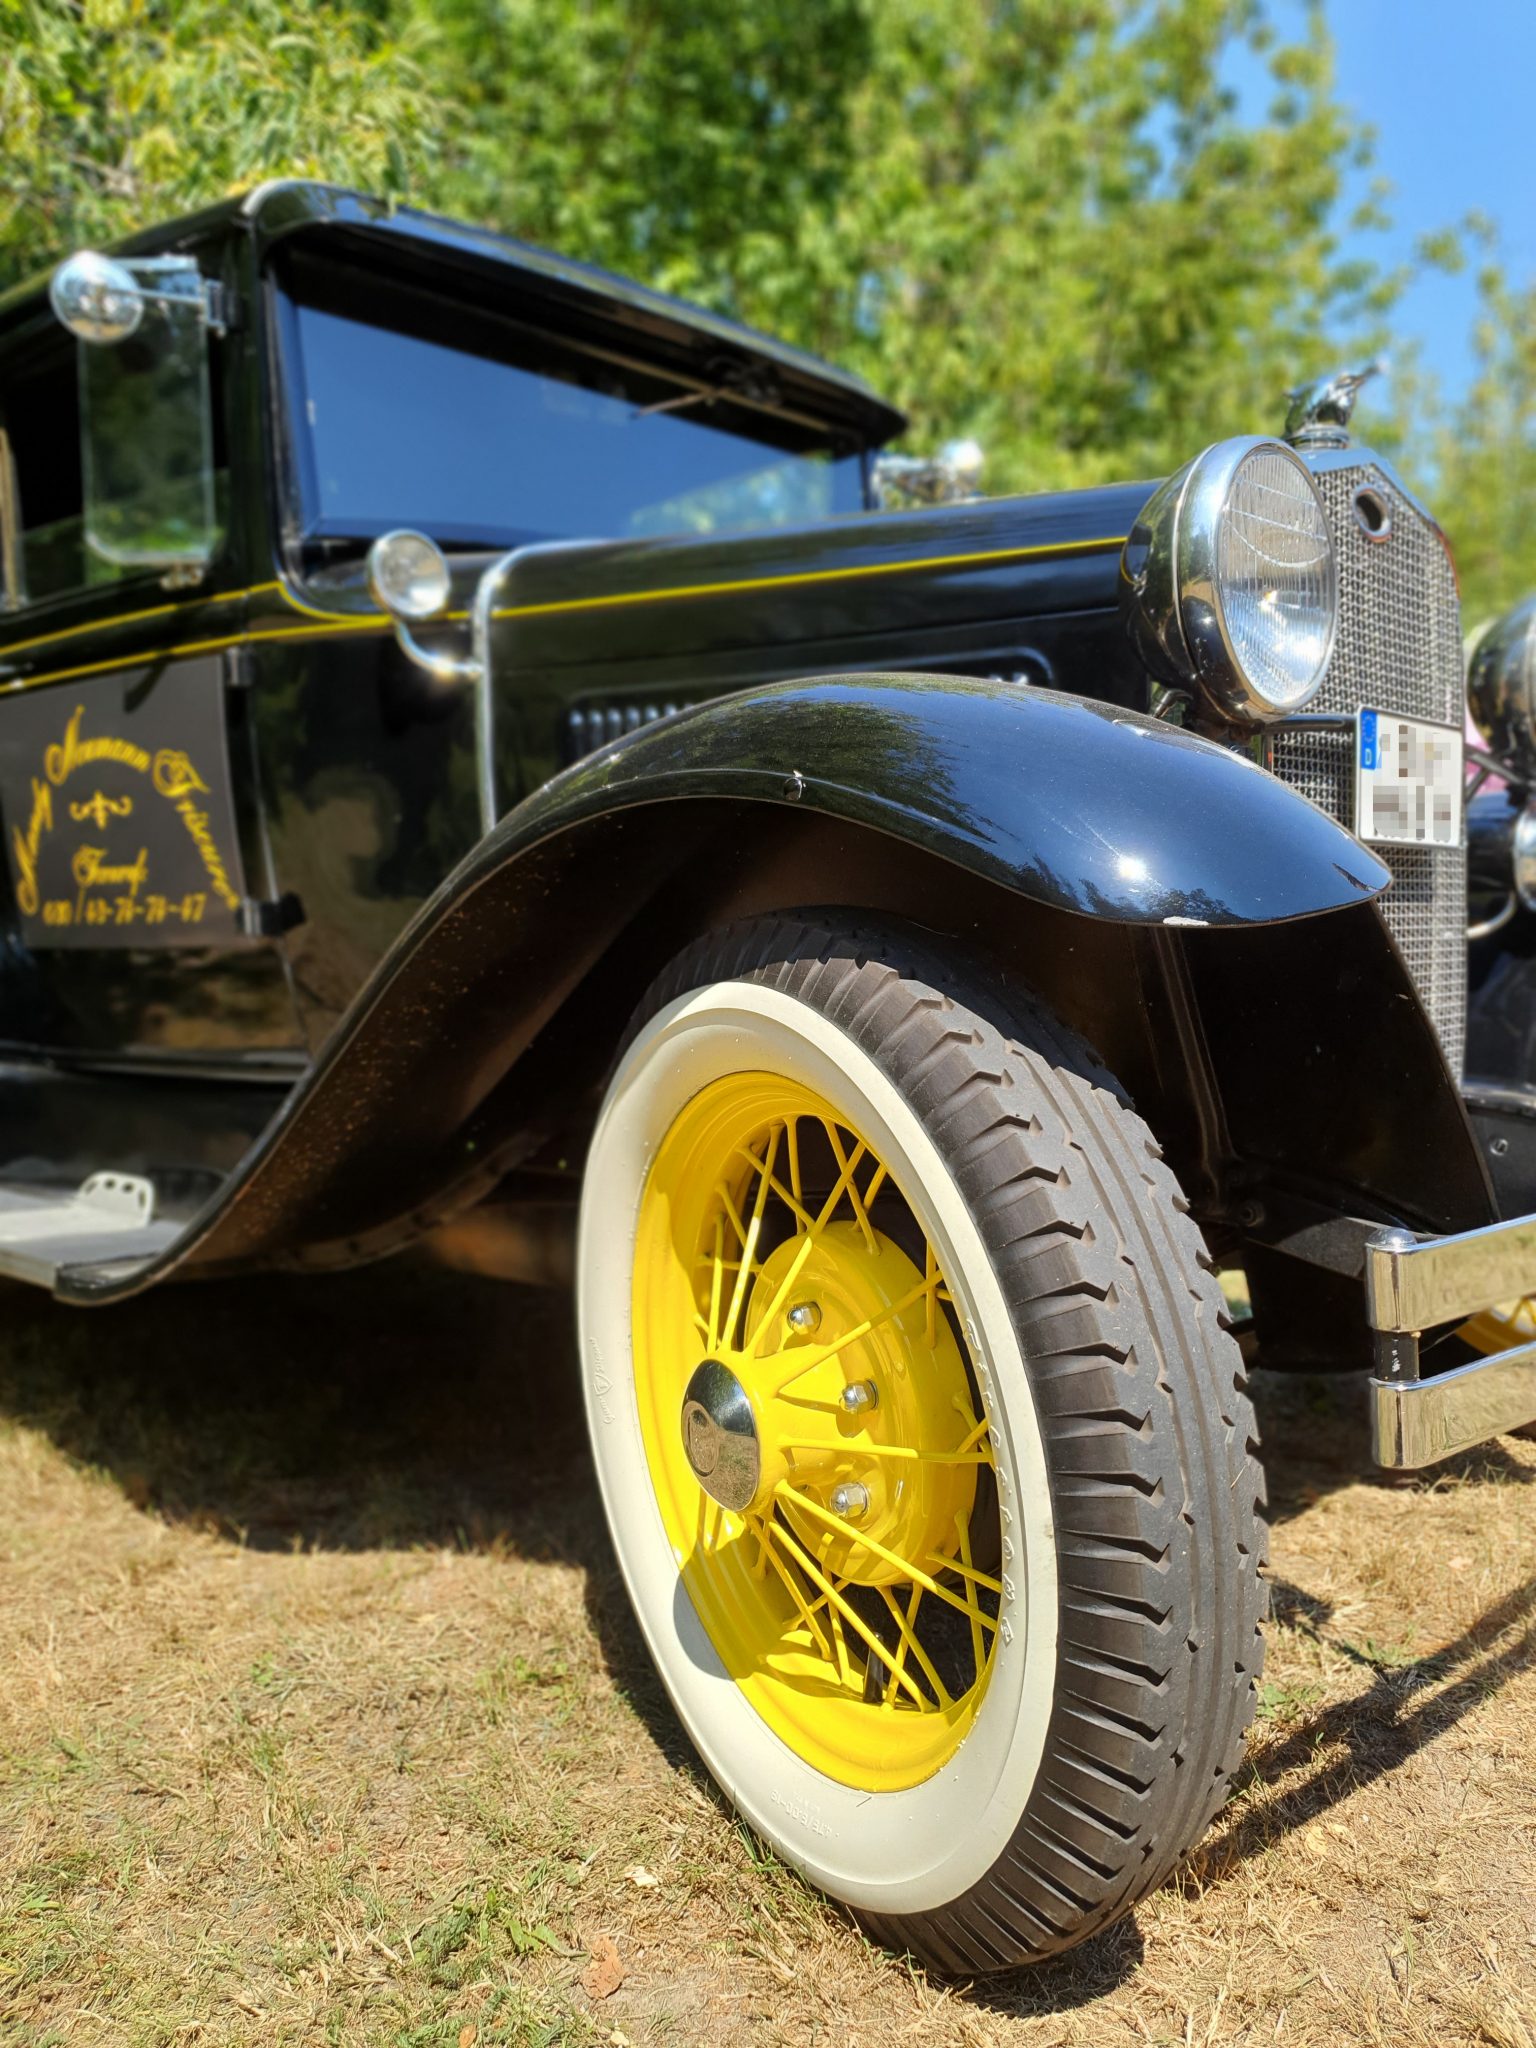 Vehicles II (oldtimers) at the Retro Picnic 2020